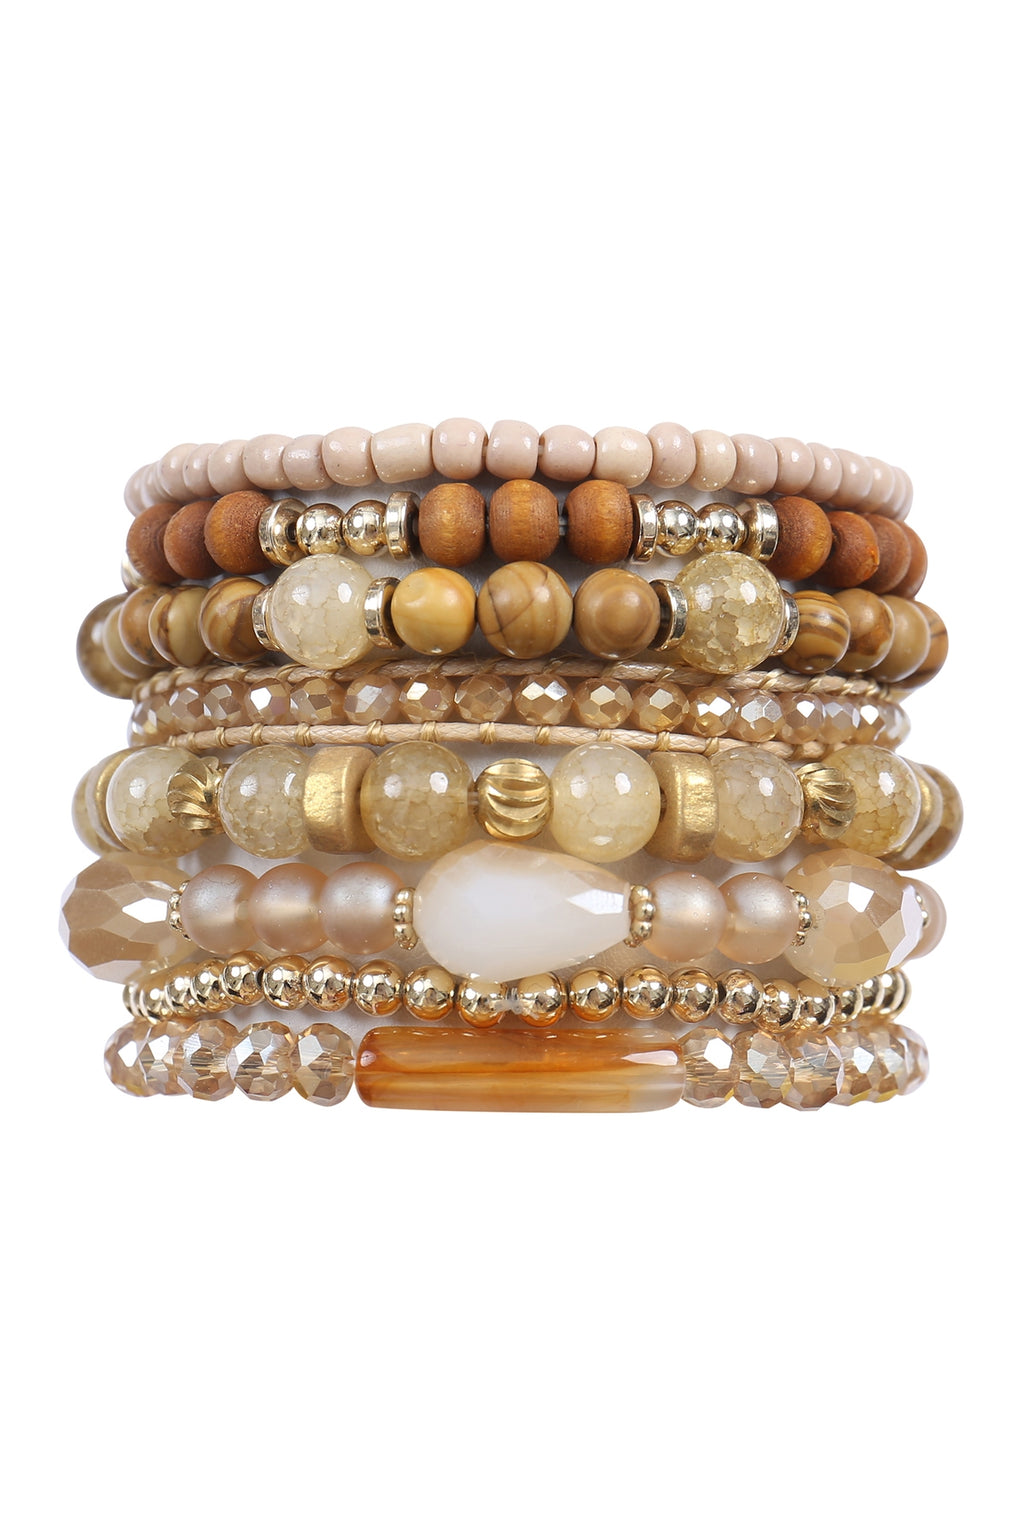 Charm Mix Beads Natural Stone Wood Layered Stackable Versatile Bracelet Set Light Brown - Pack of 6